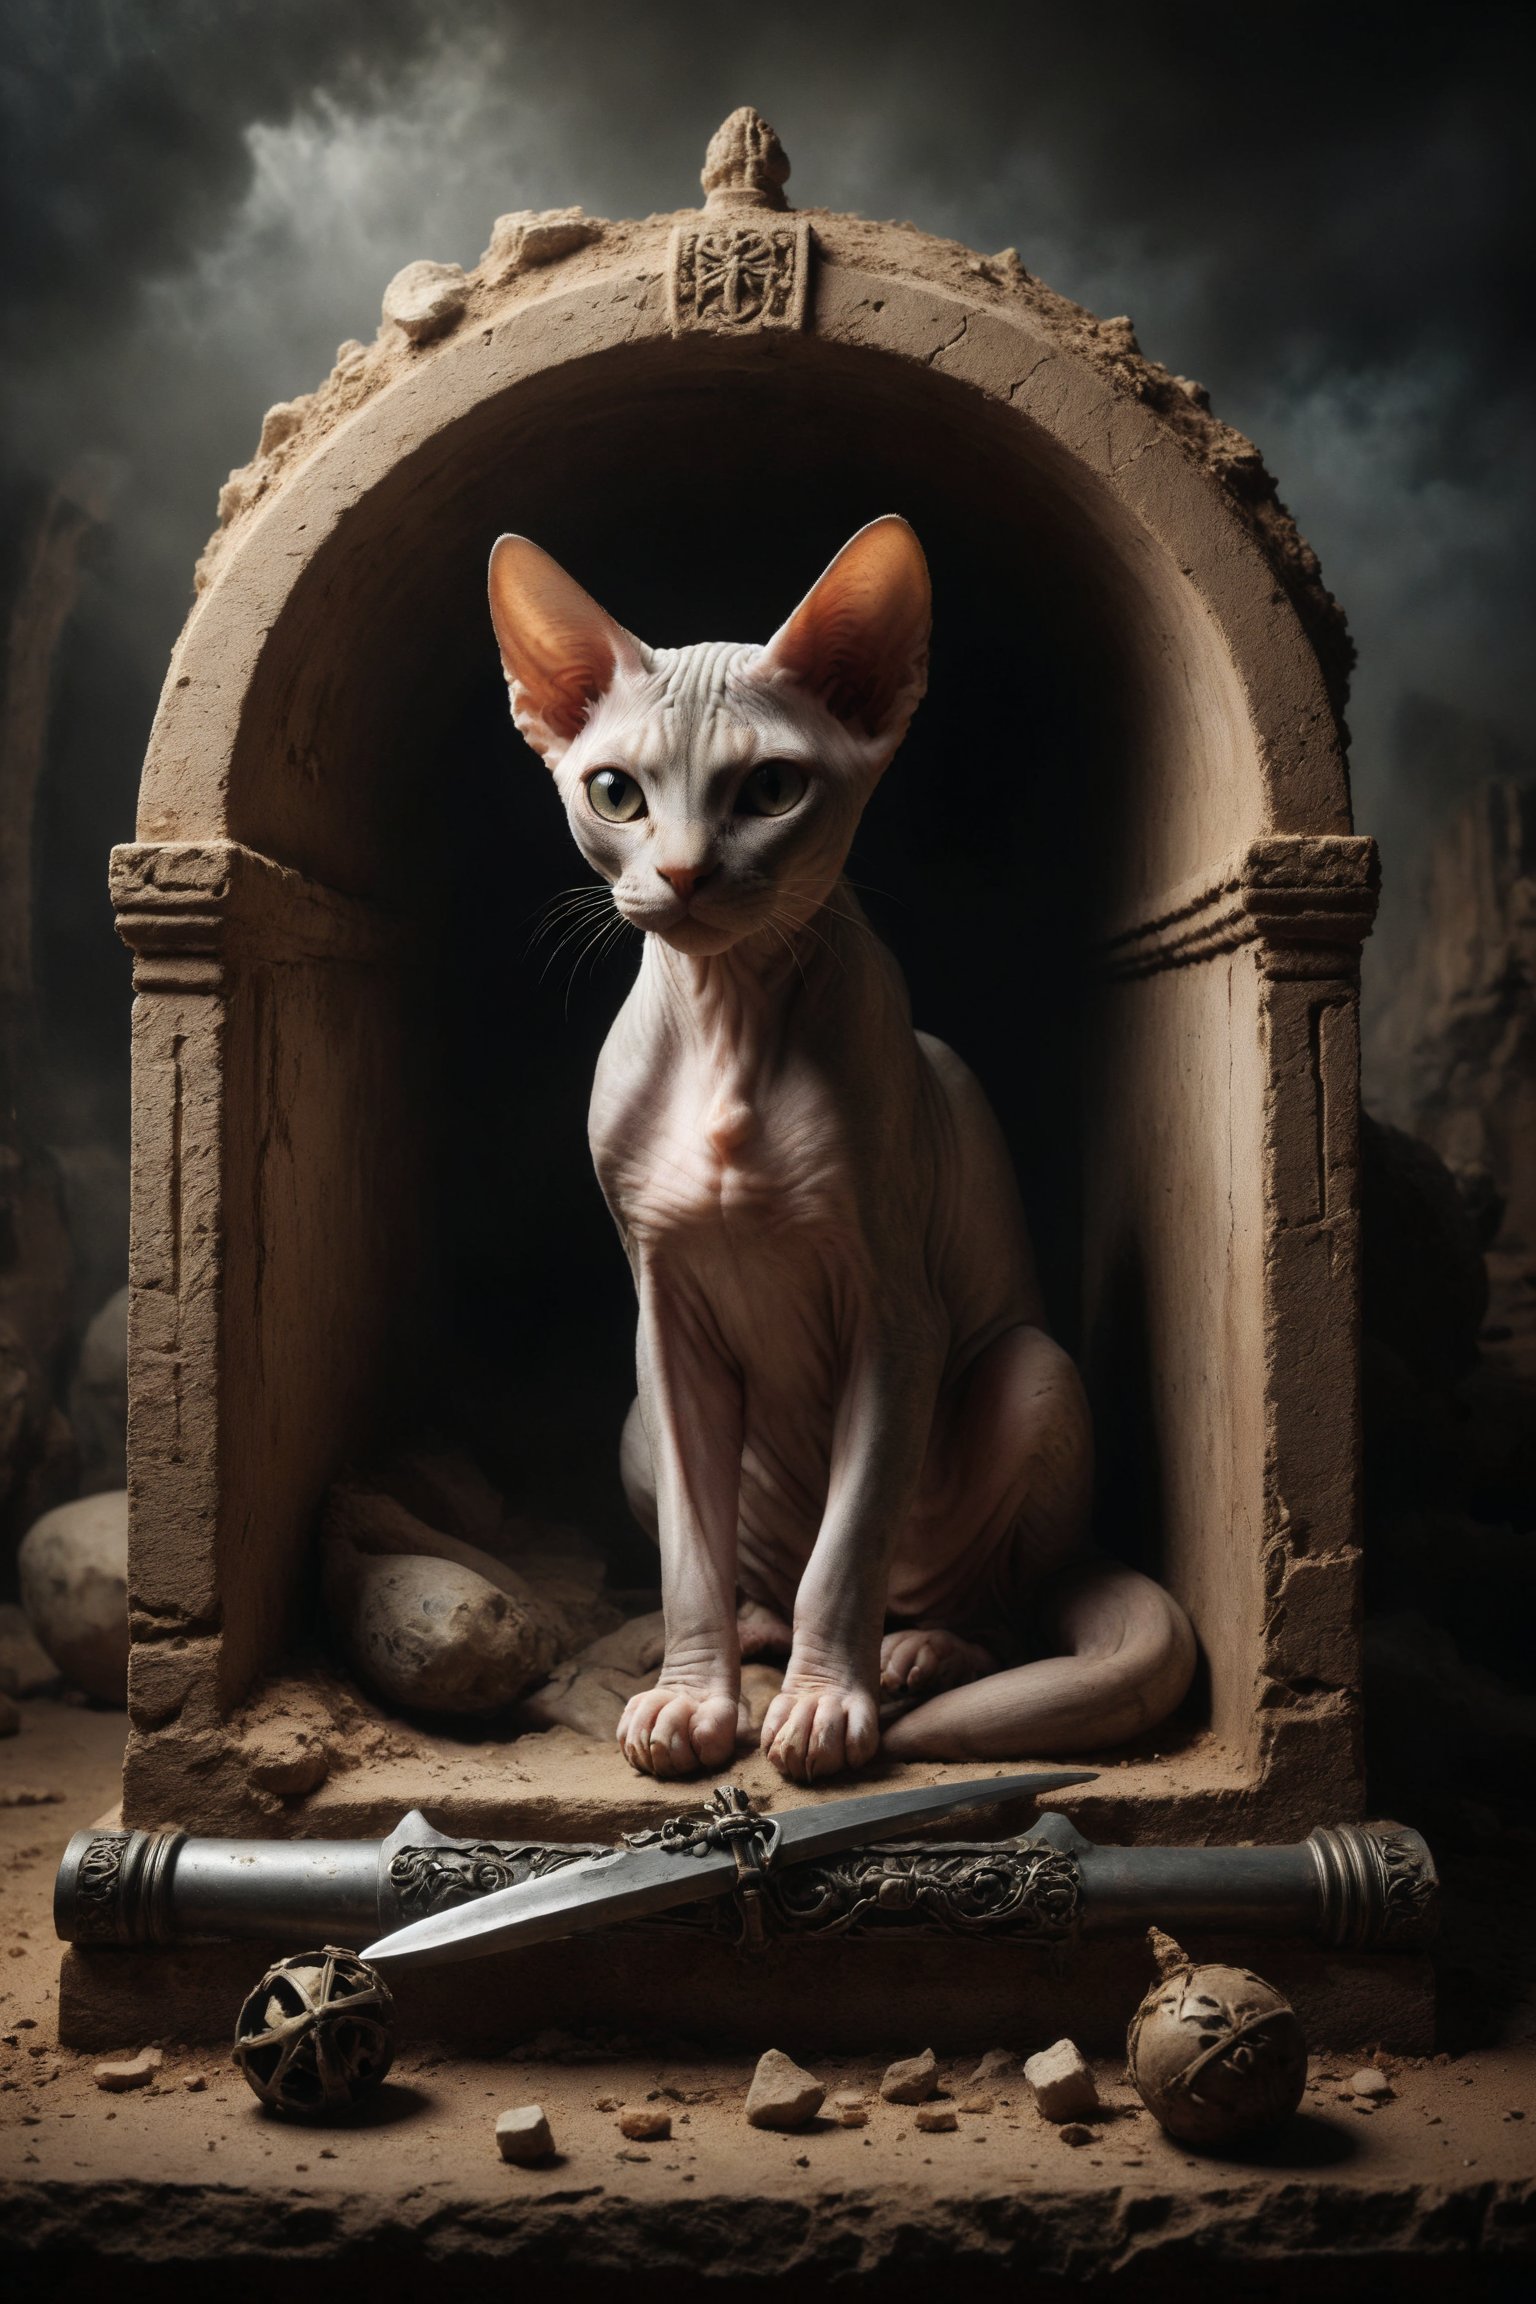 Create a scene of a Sphynx cat resting in a sarcophagus, with four swords crossed over it, symbolizing rest, meditation, and the need for recuperation.